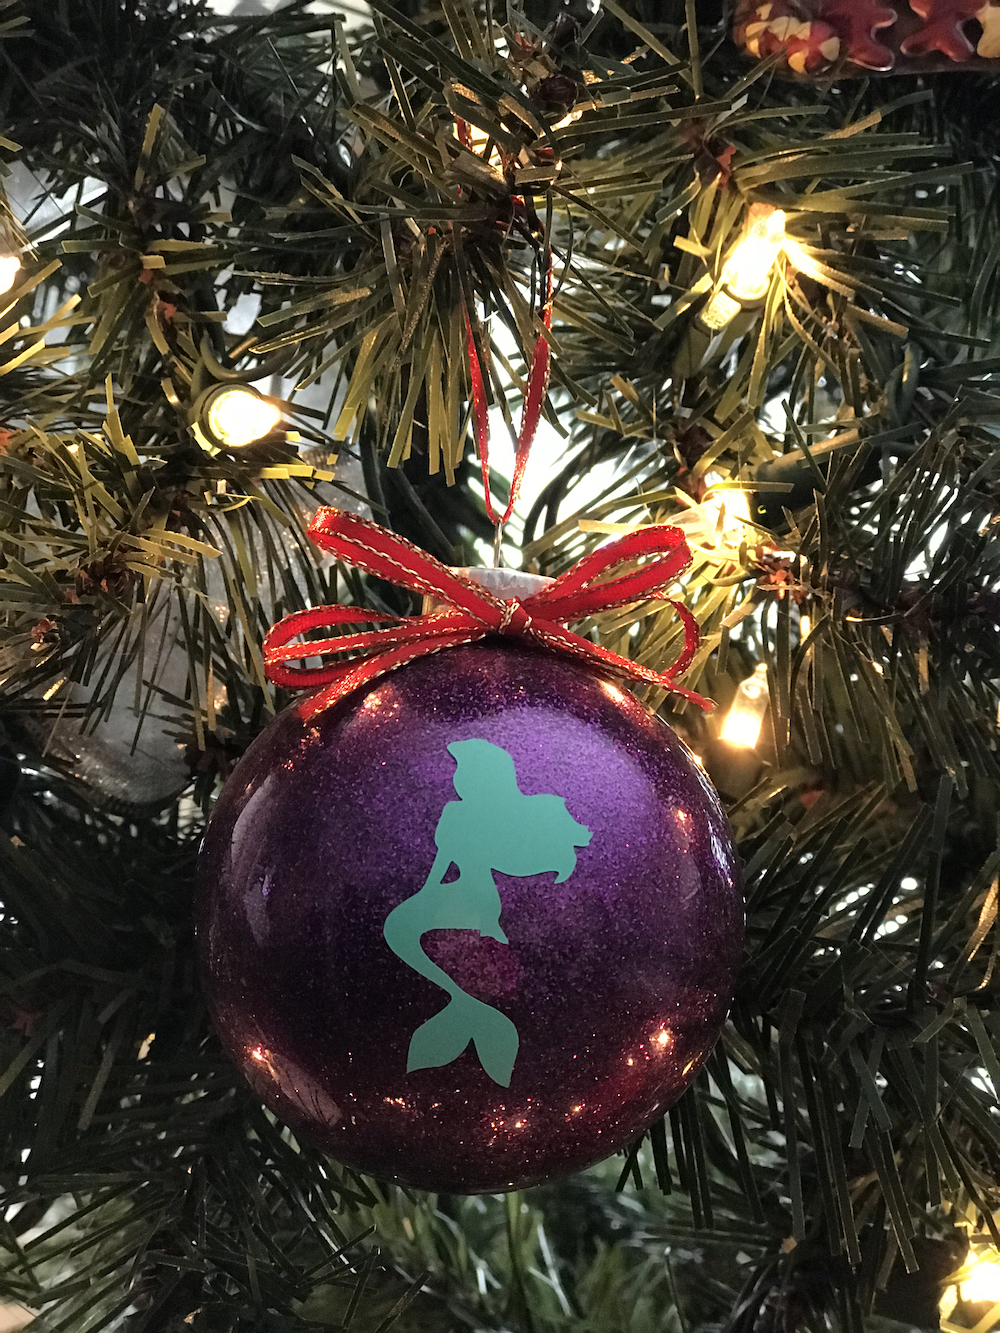 The Little Mermaid ornament is next in my ornament series. You can easily make this DIY Princess Ornament yourself with this free cut file and tutorial.